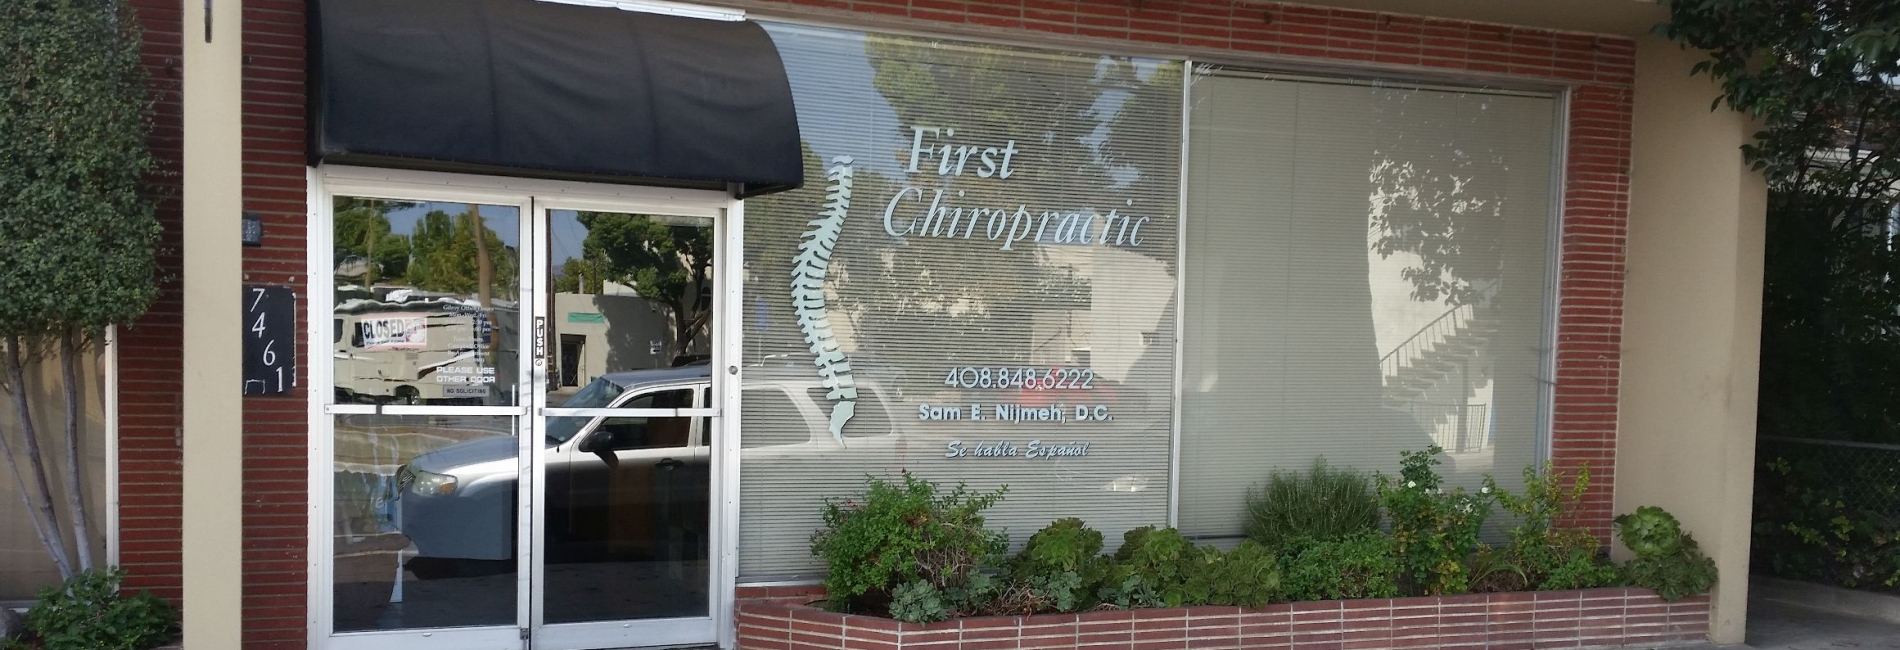 First Chiropractic – Gilroy, CA 408.848.6222 – office entrance-3